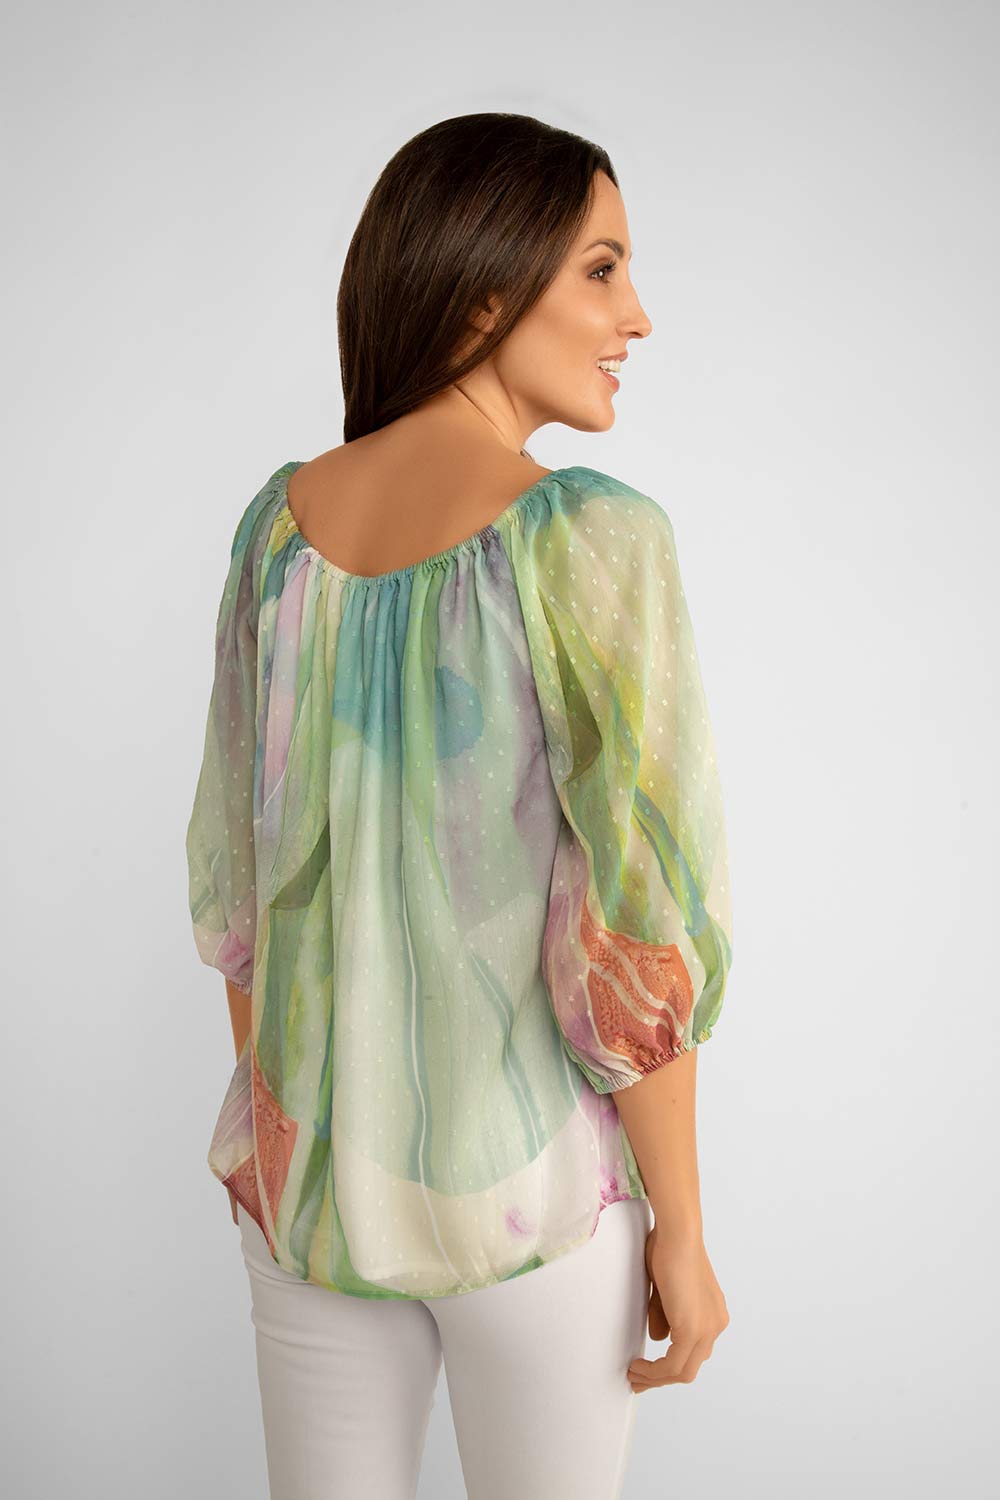 Claire Desjardins (91438) Women's 3/4 Puff Sleeve Pastel Green Off Shoulder Blouse Made in Textured Chiffon.